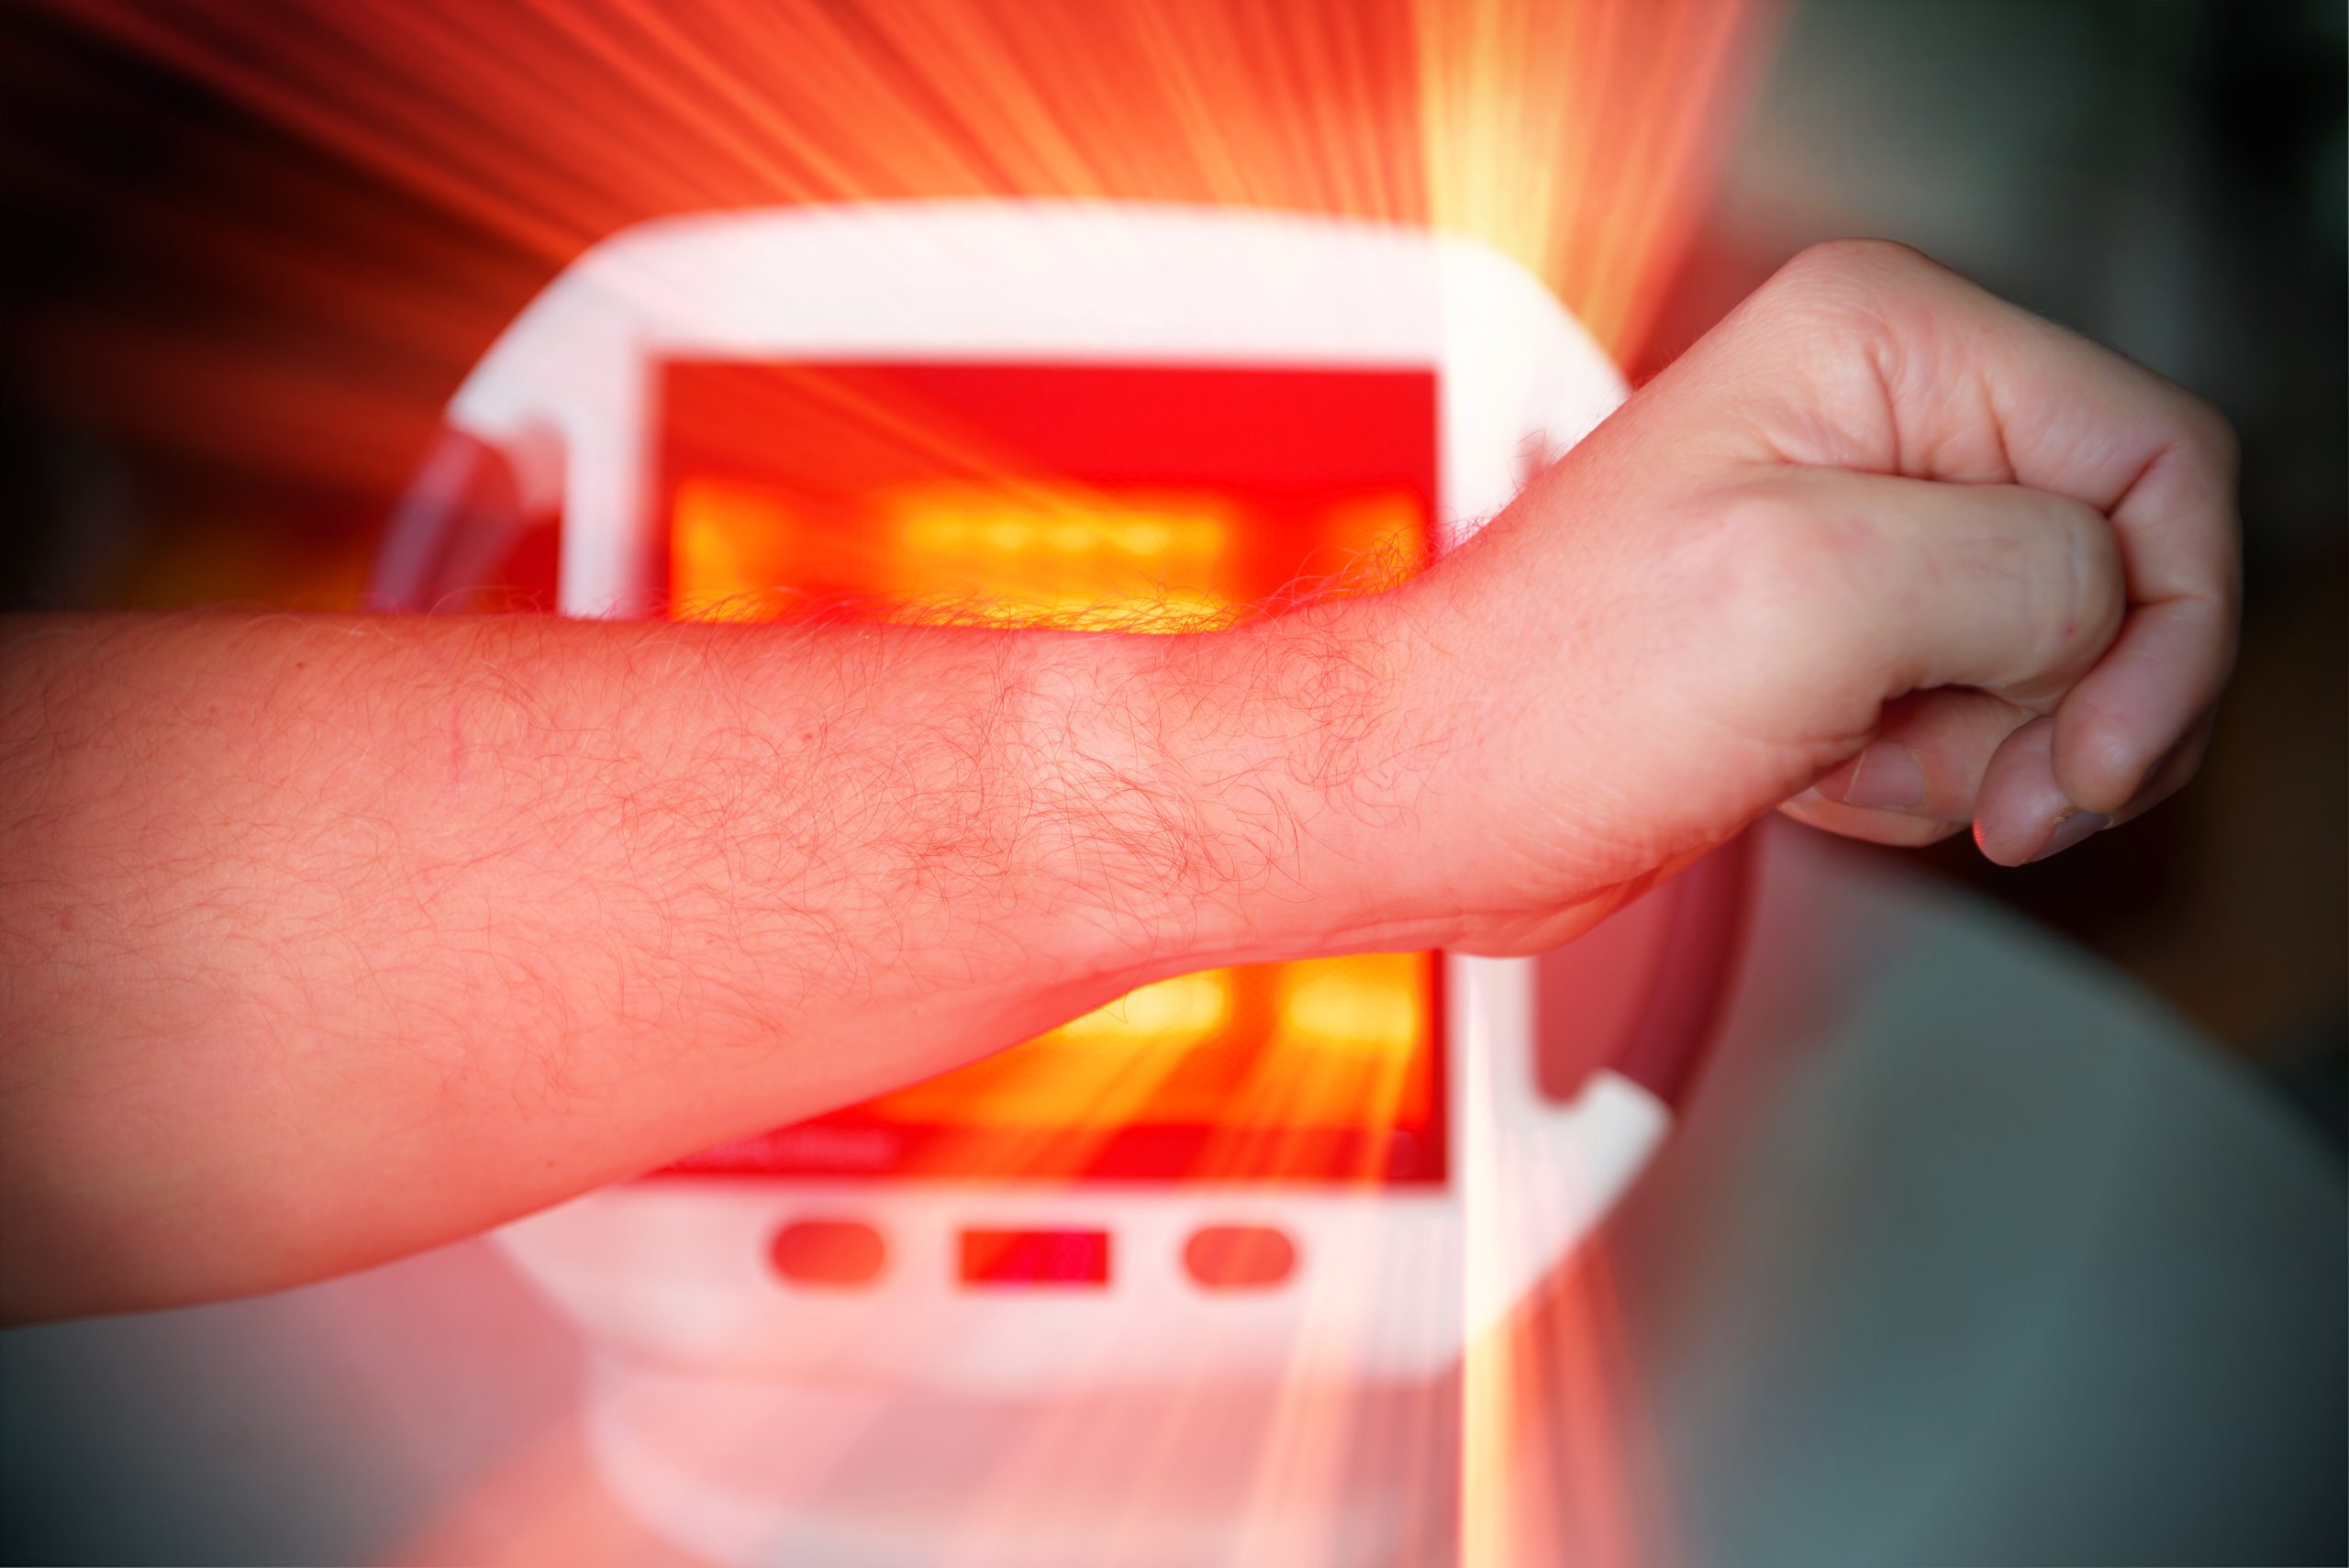 red light therapy, red light therapy benefits, red light therapy before and after, red light therapy at home